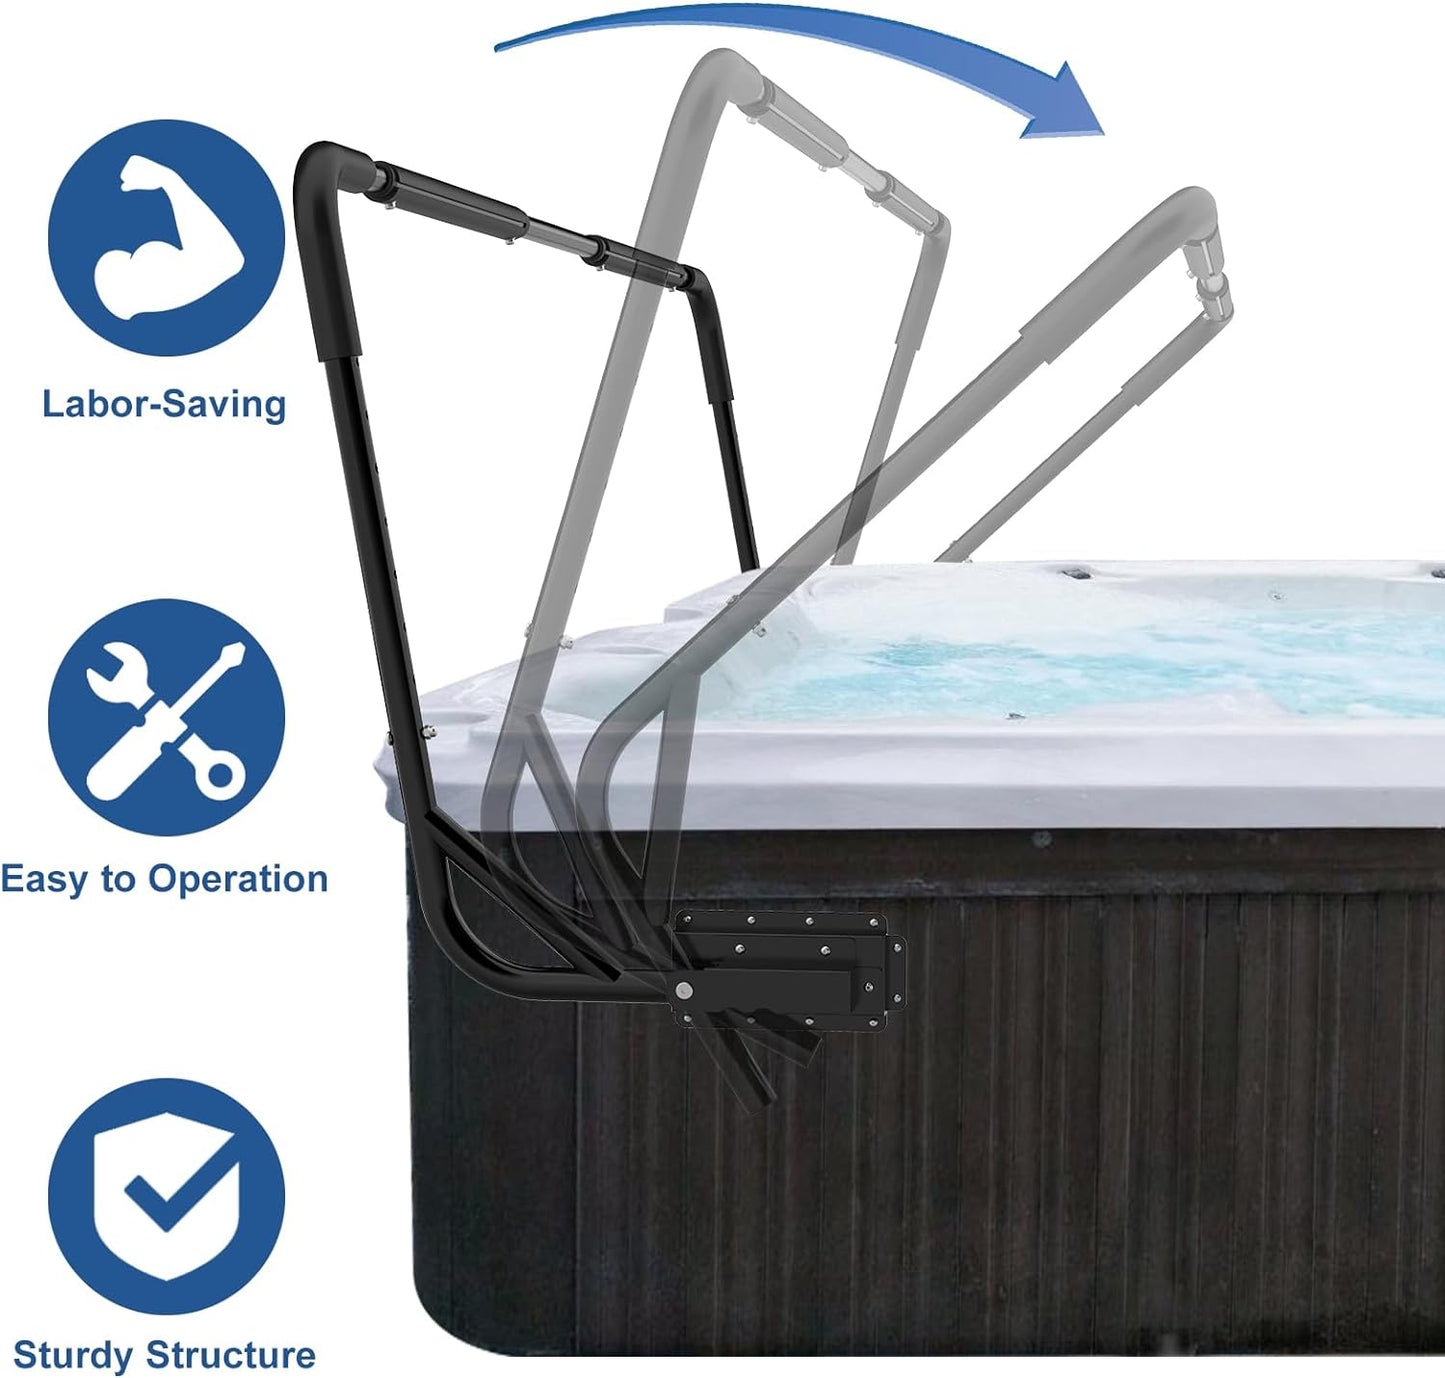 Adjustable Hot Tub/Spa Cover Lifter, Fit for Most Spa/'Hot Tubs